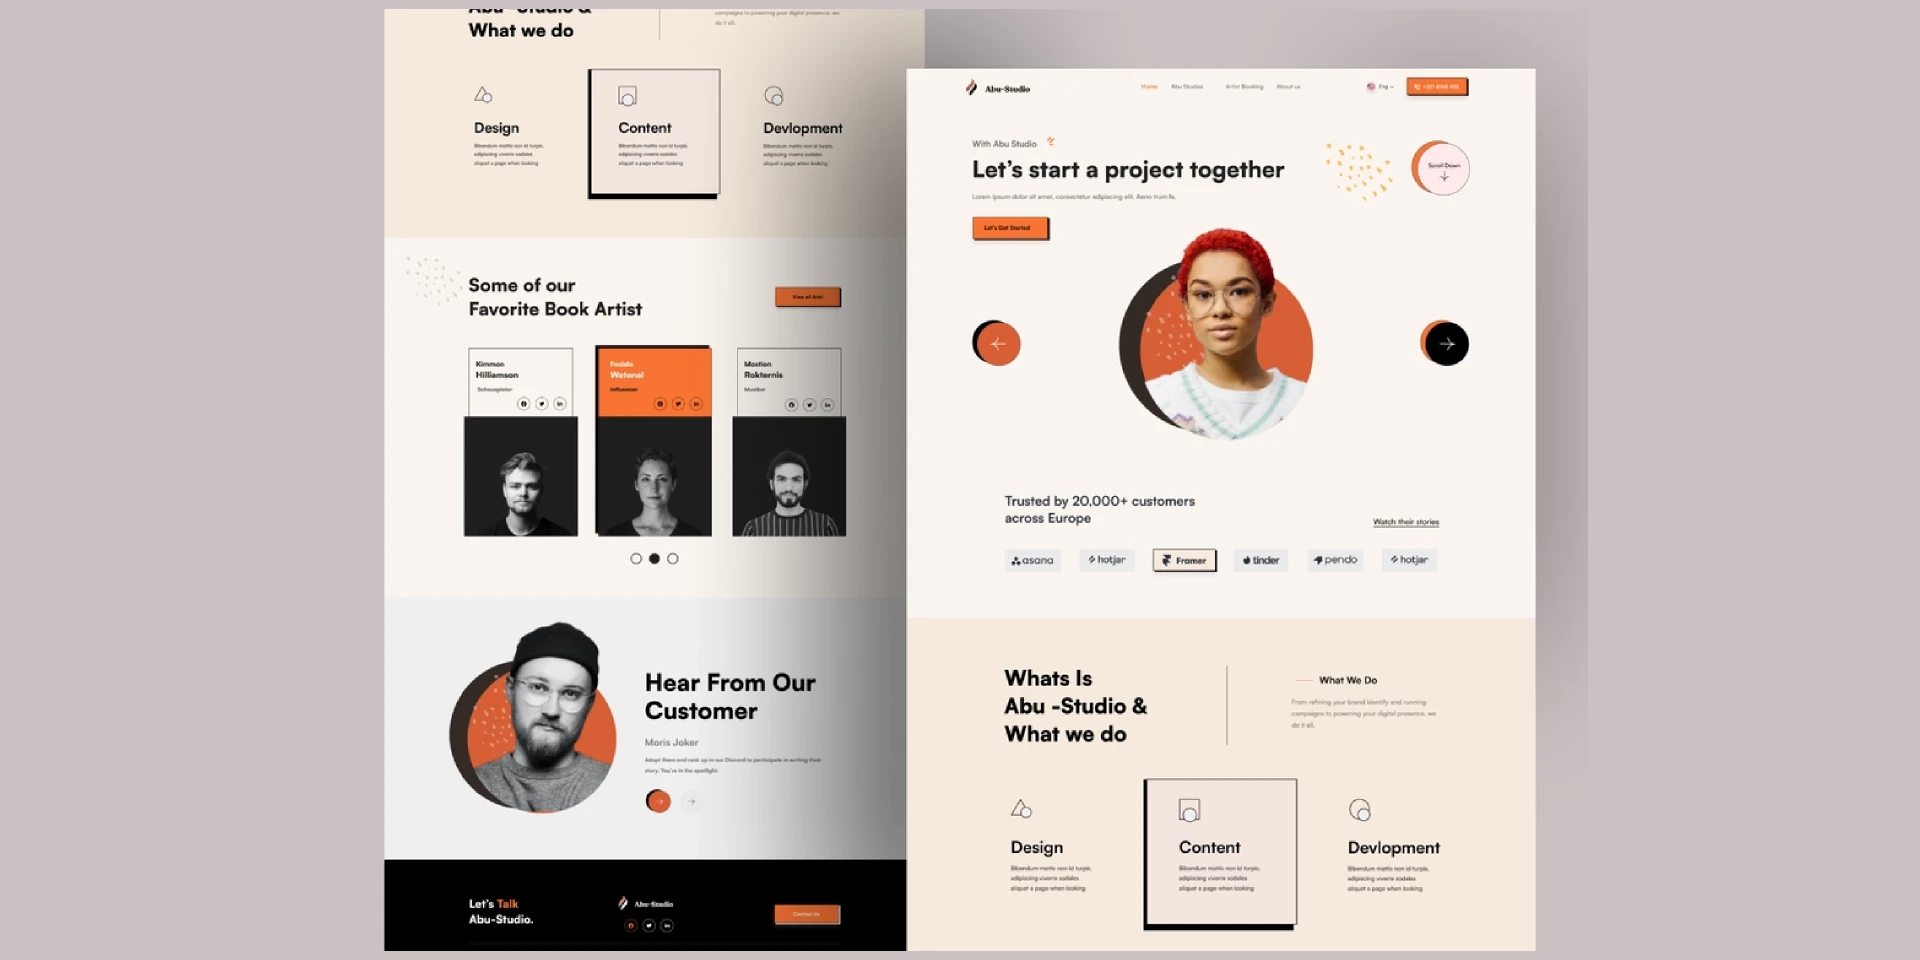 Web Page : Digital agency landing page for Figma and Adobe XD